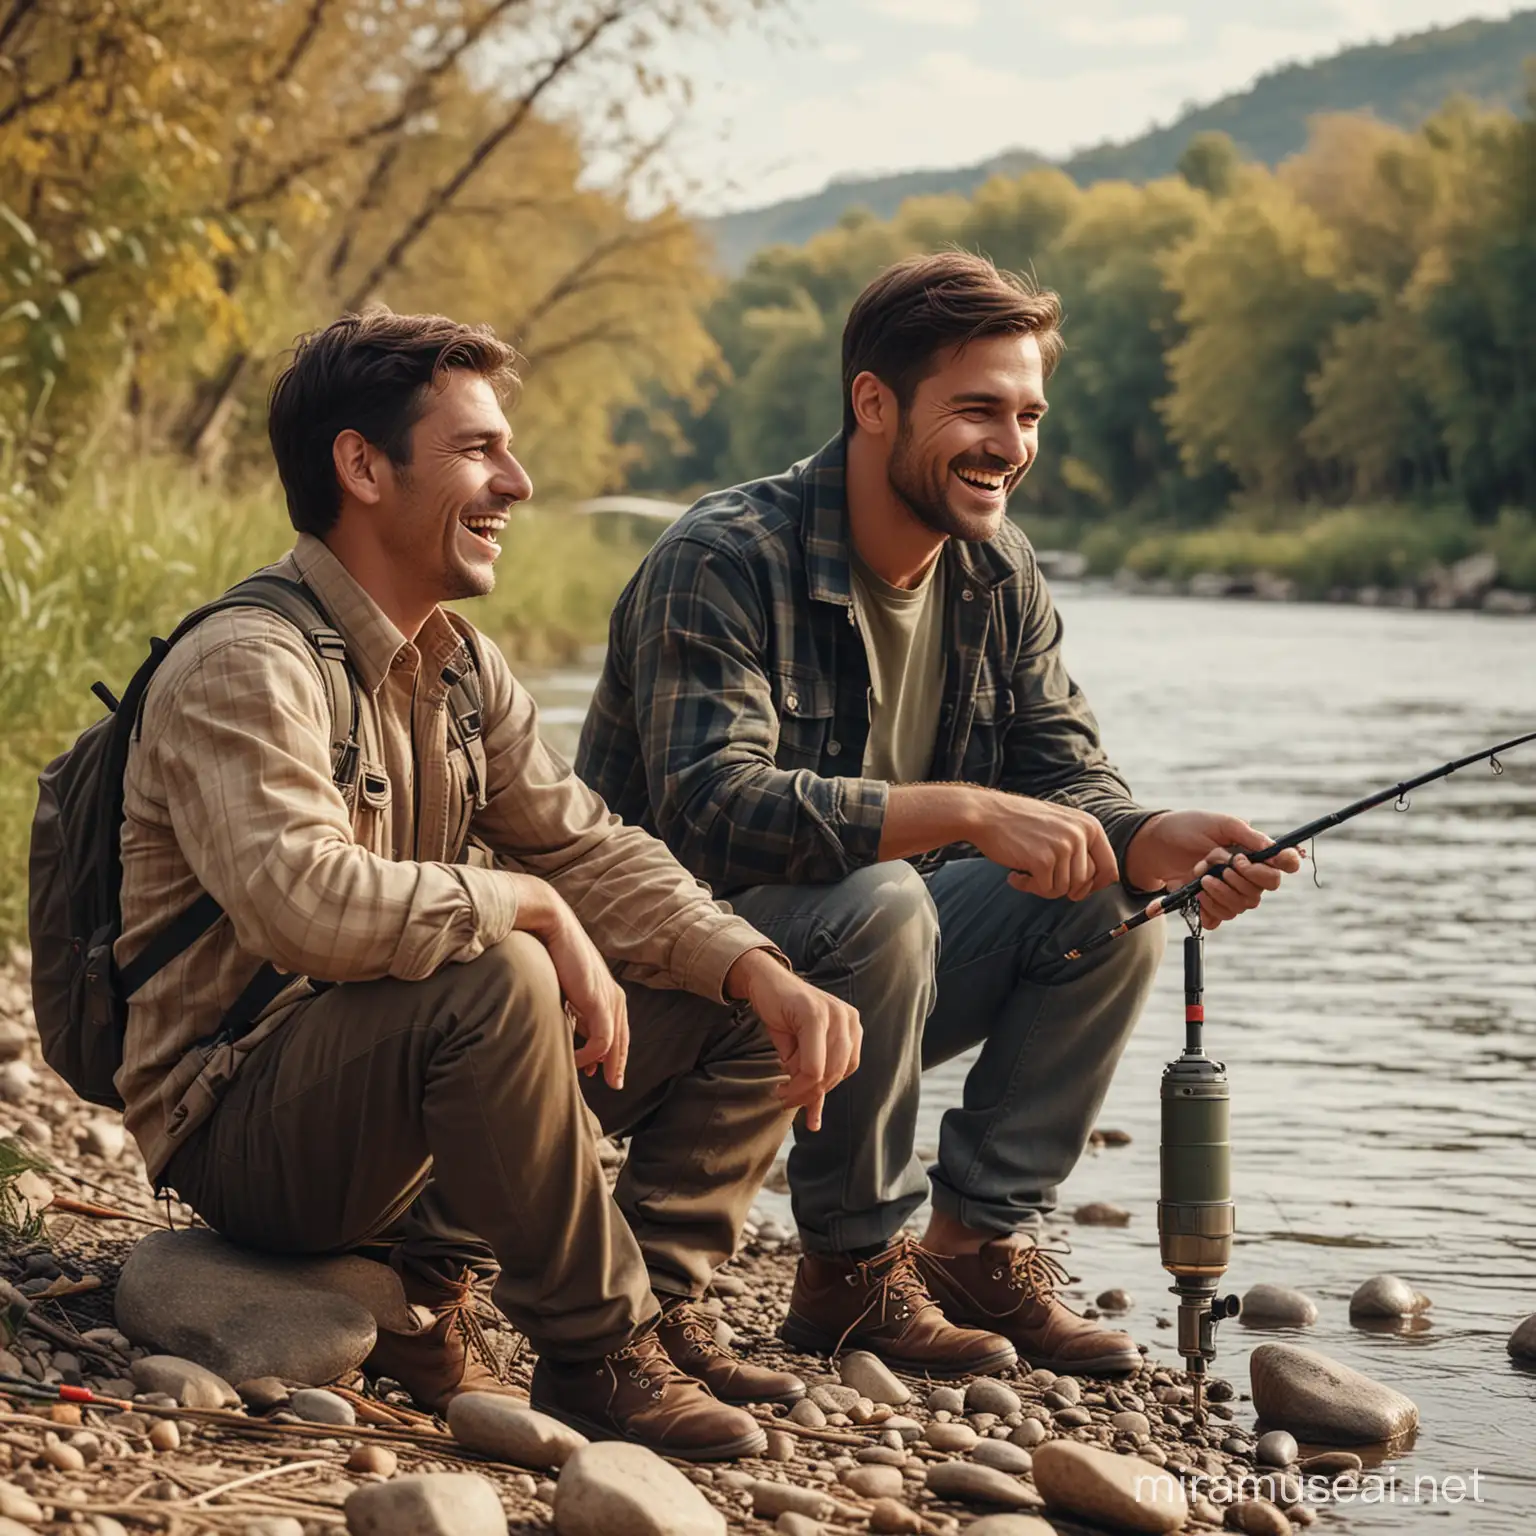 Joyful Father and Son Fishing by the Riverside HighQuality 8K Image